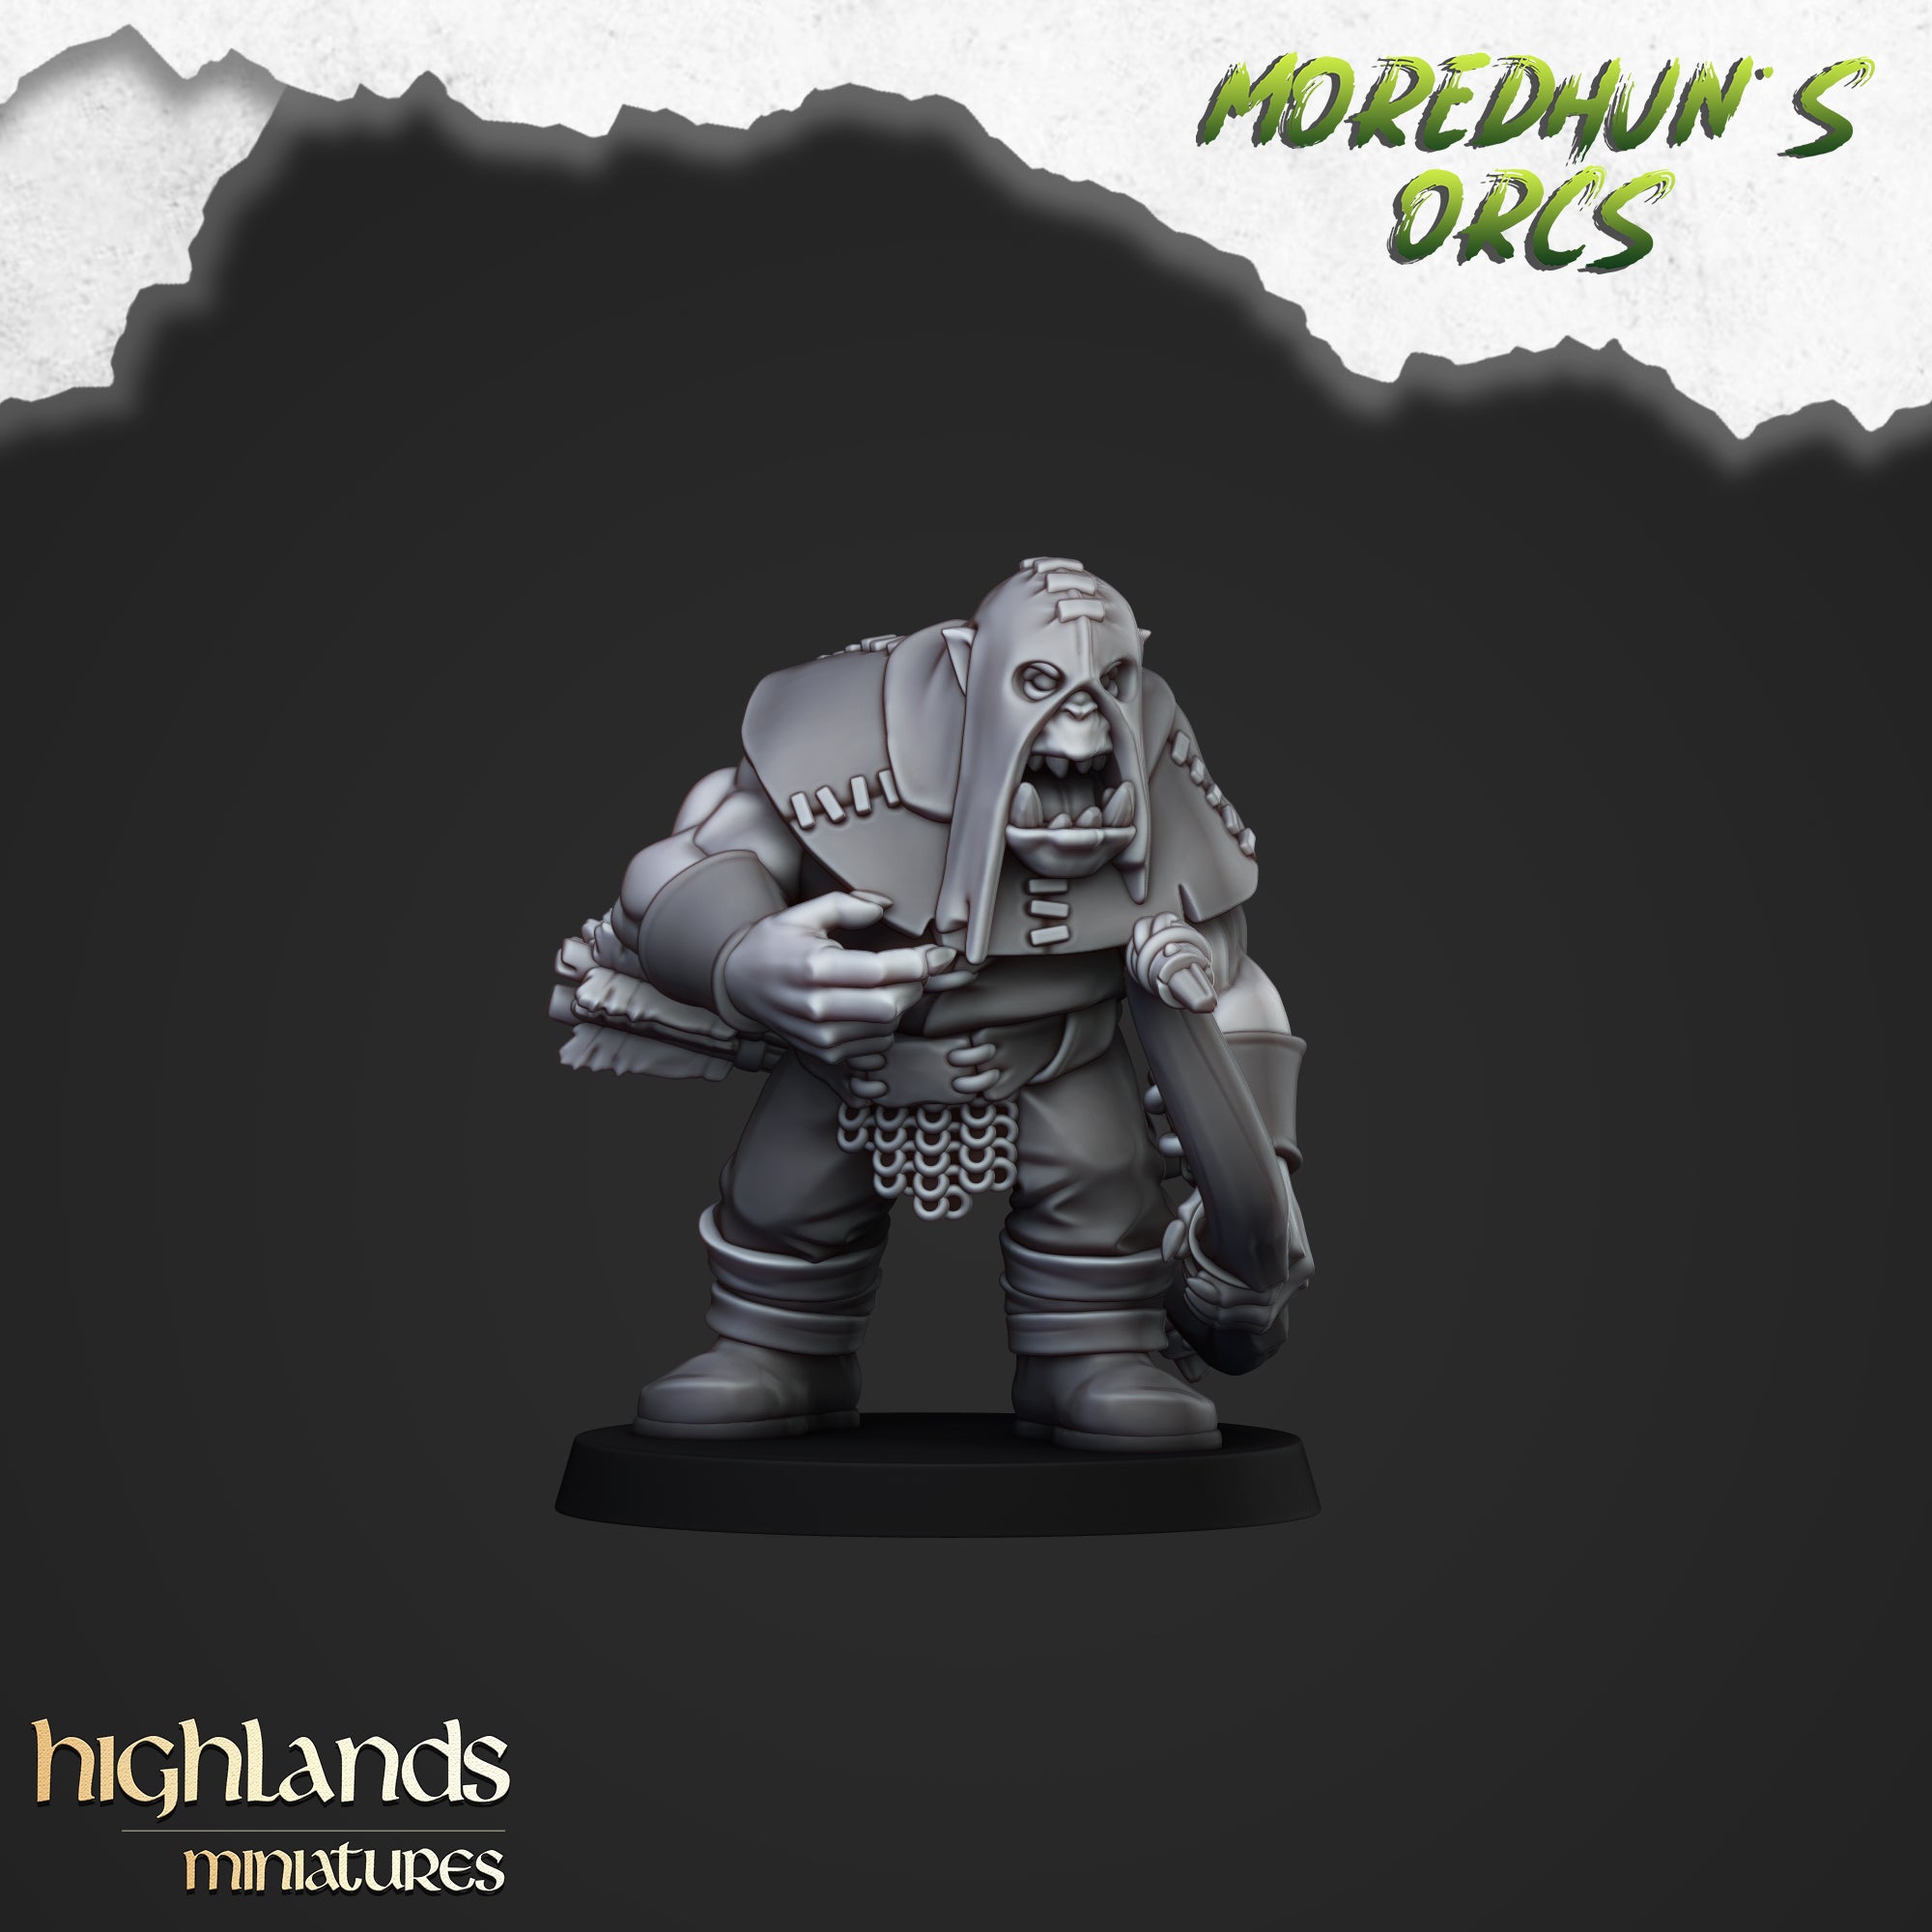 Orc Warriors with Bows (x10) - Orc & Goblin Tribes | Highlands Miniatures